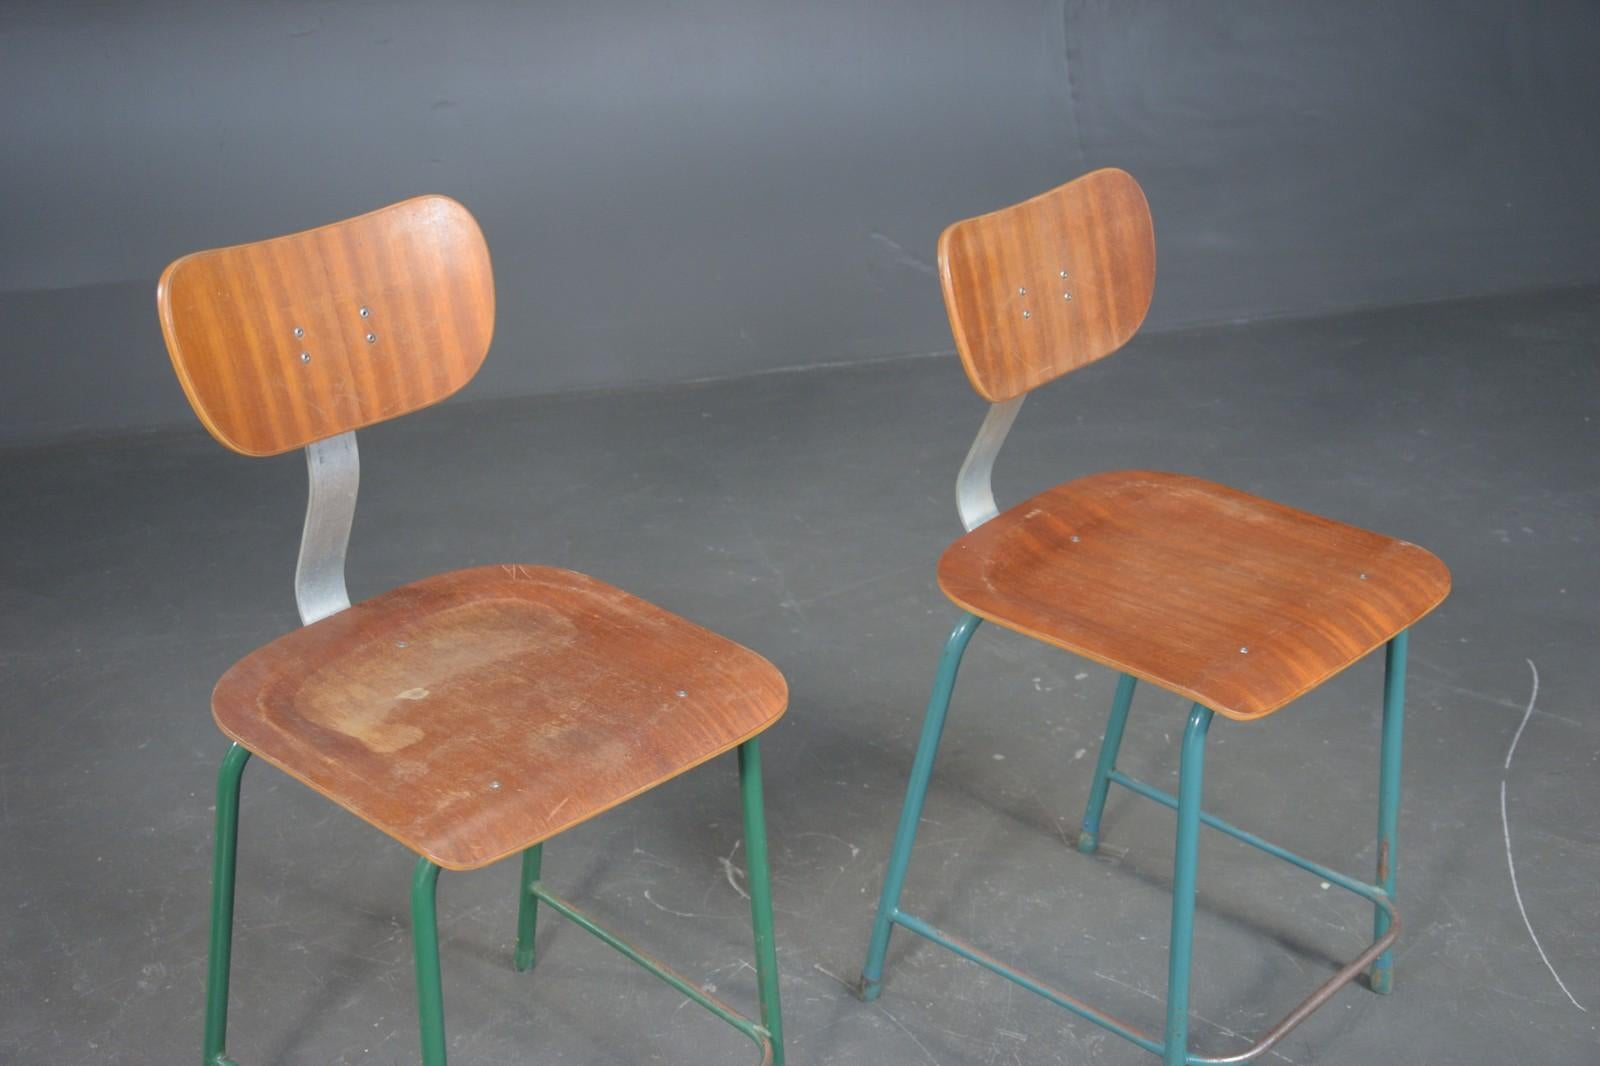 Midcentury Industrial / Work Stools Chairs In Fair Condition For Sale In Vienna, AT